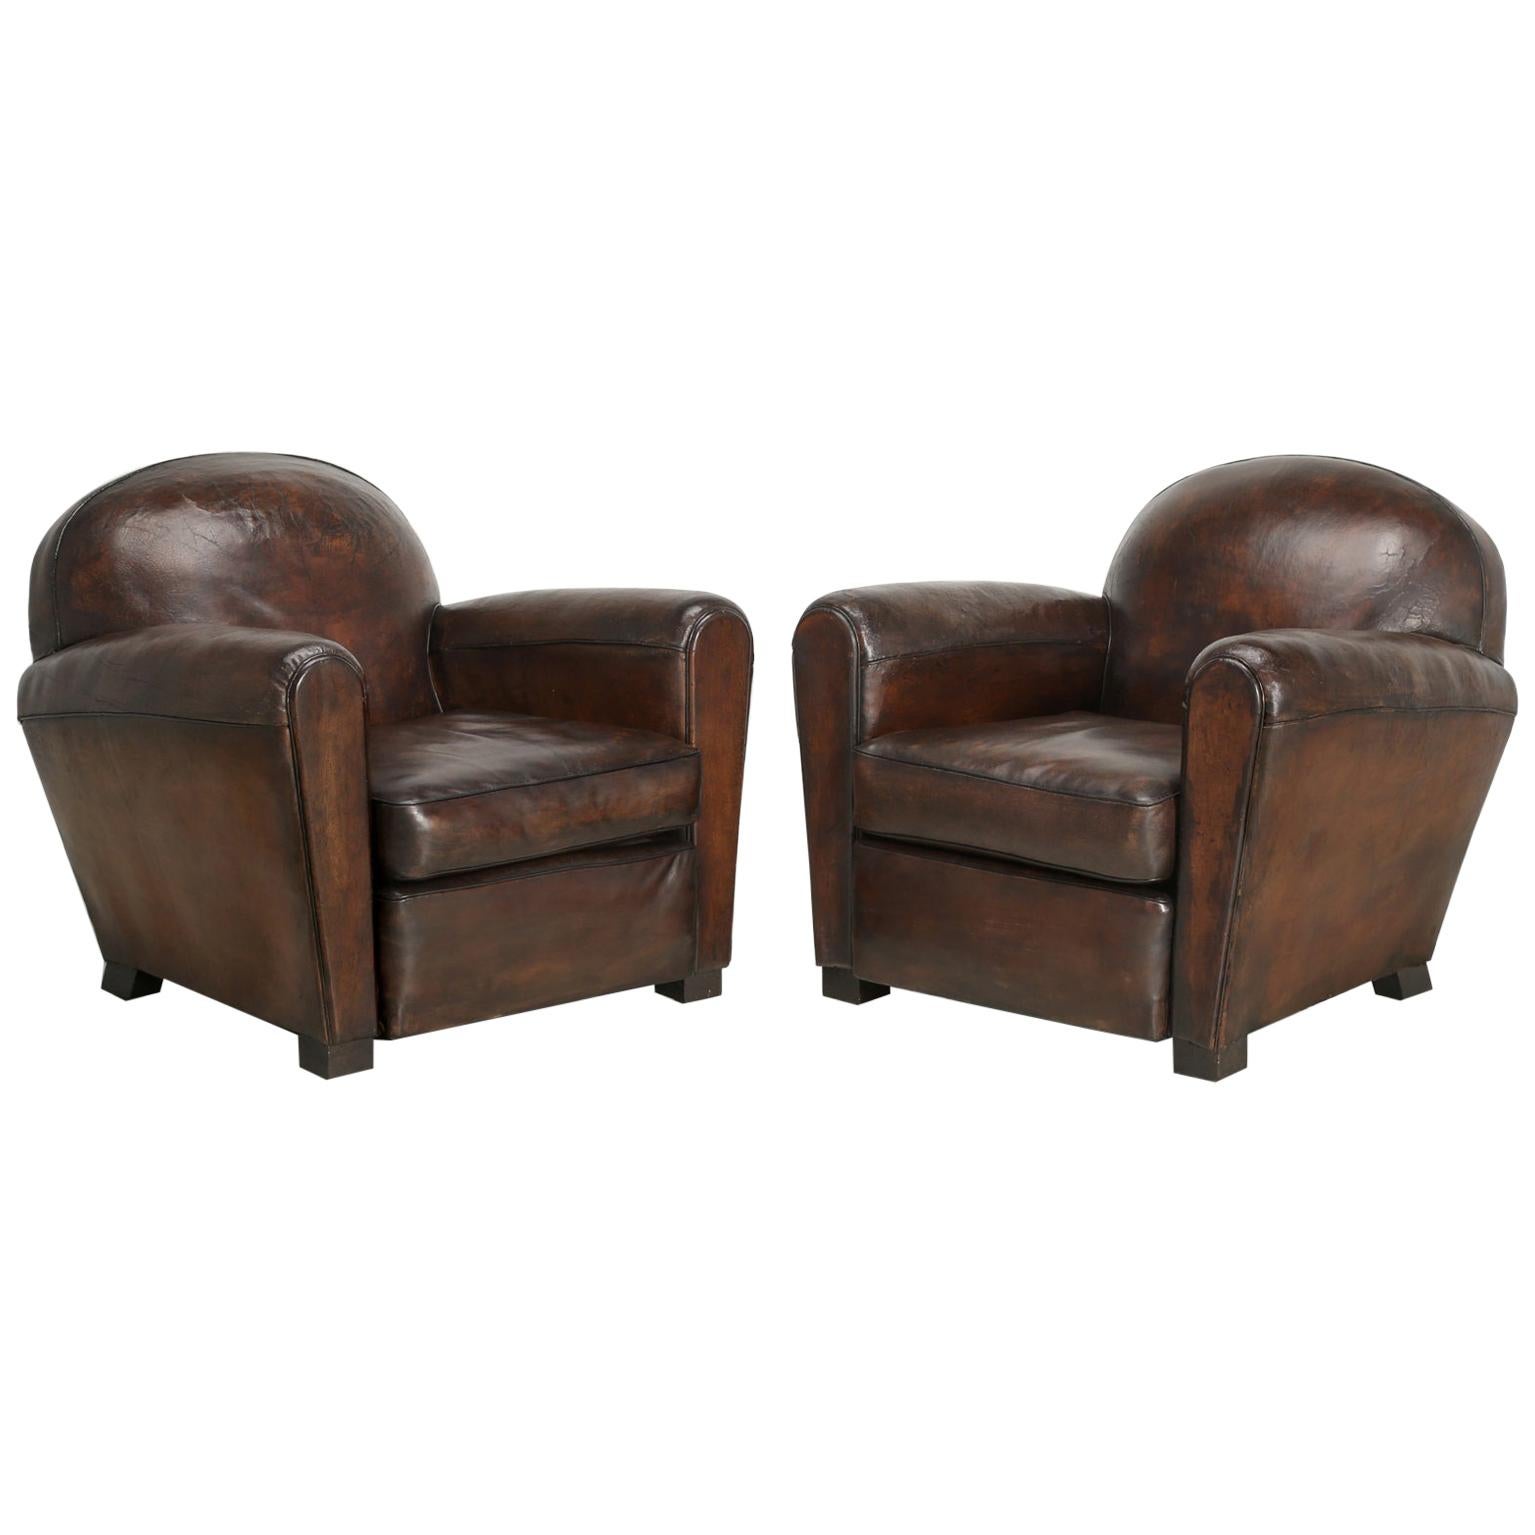 Pair of Leather French Club Chairs Completely Restored, Original Leather